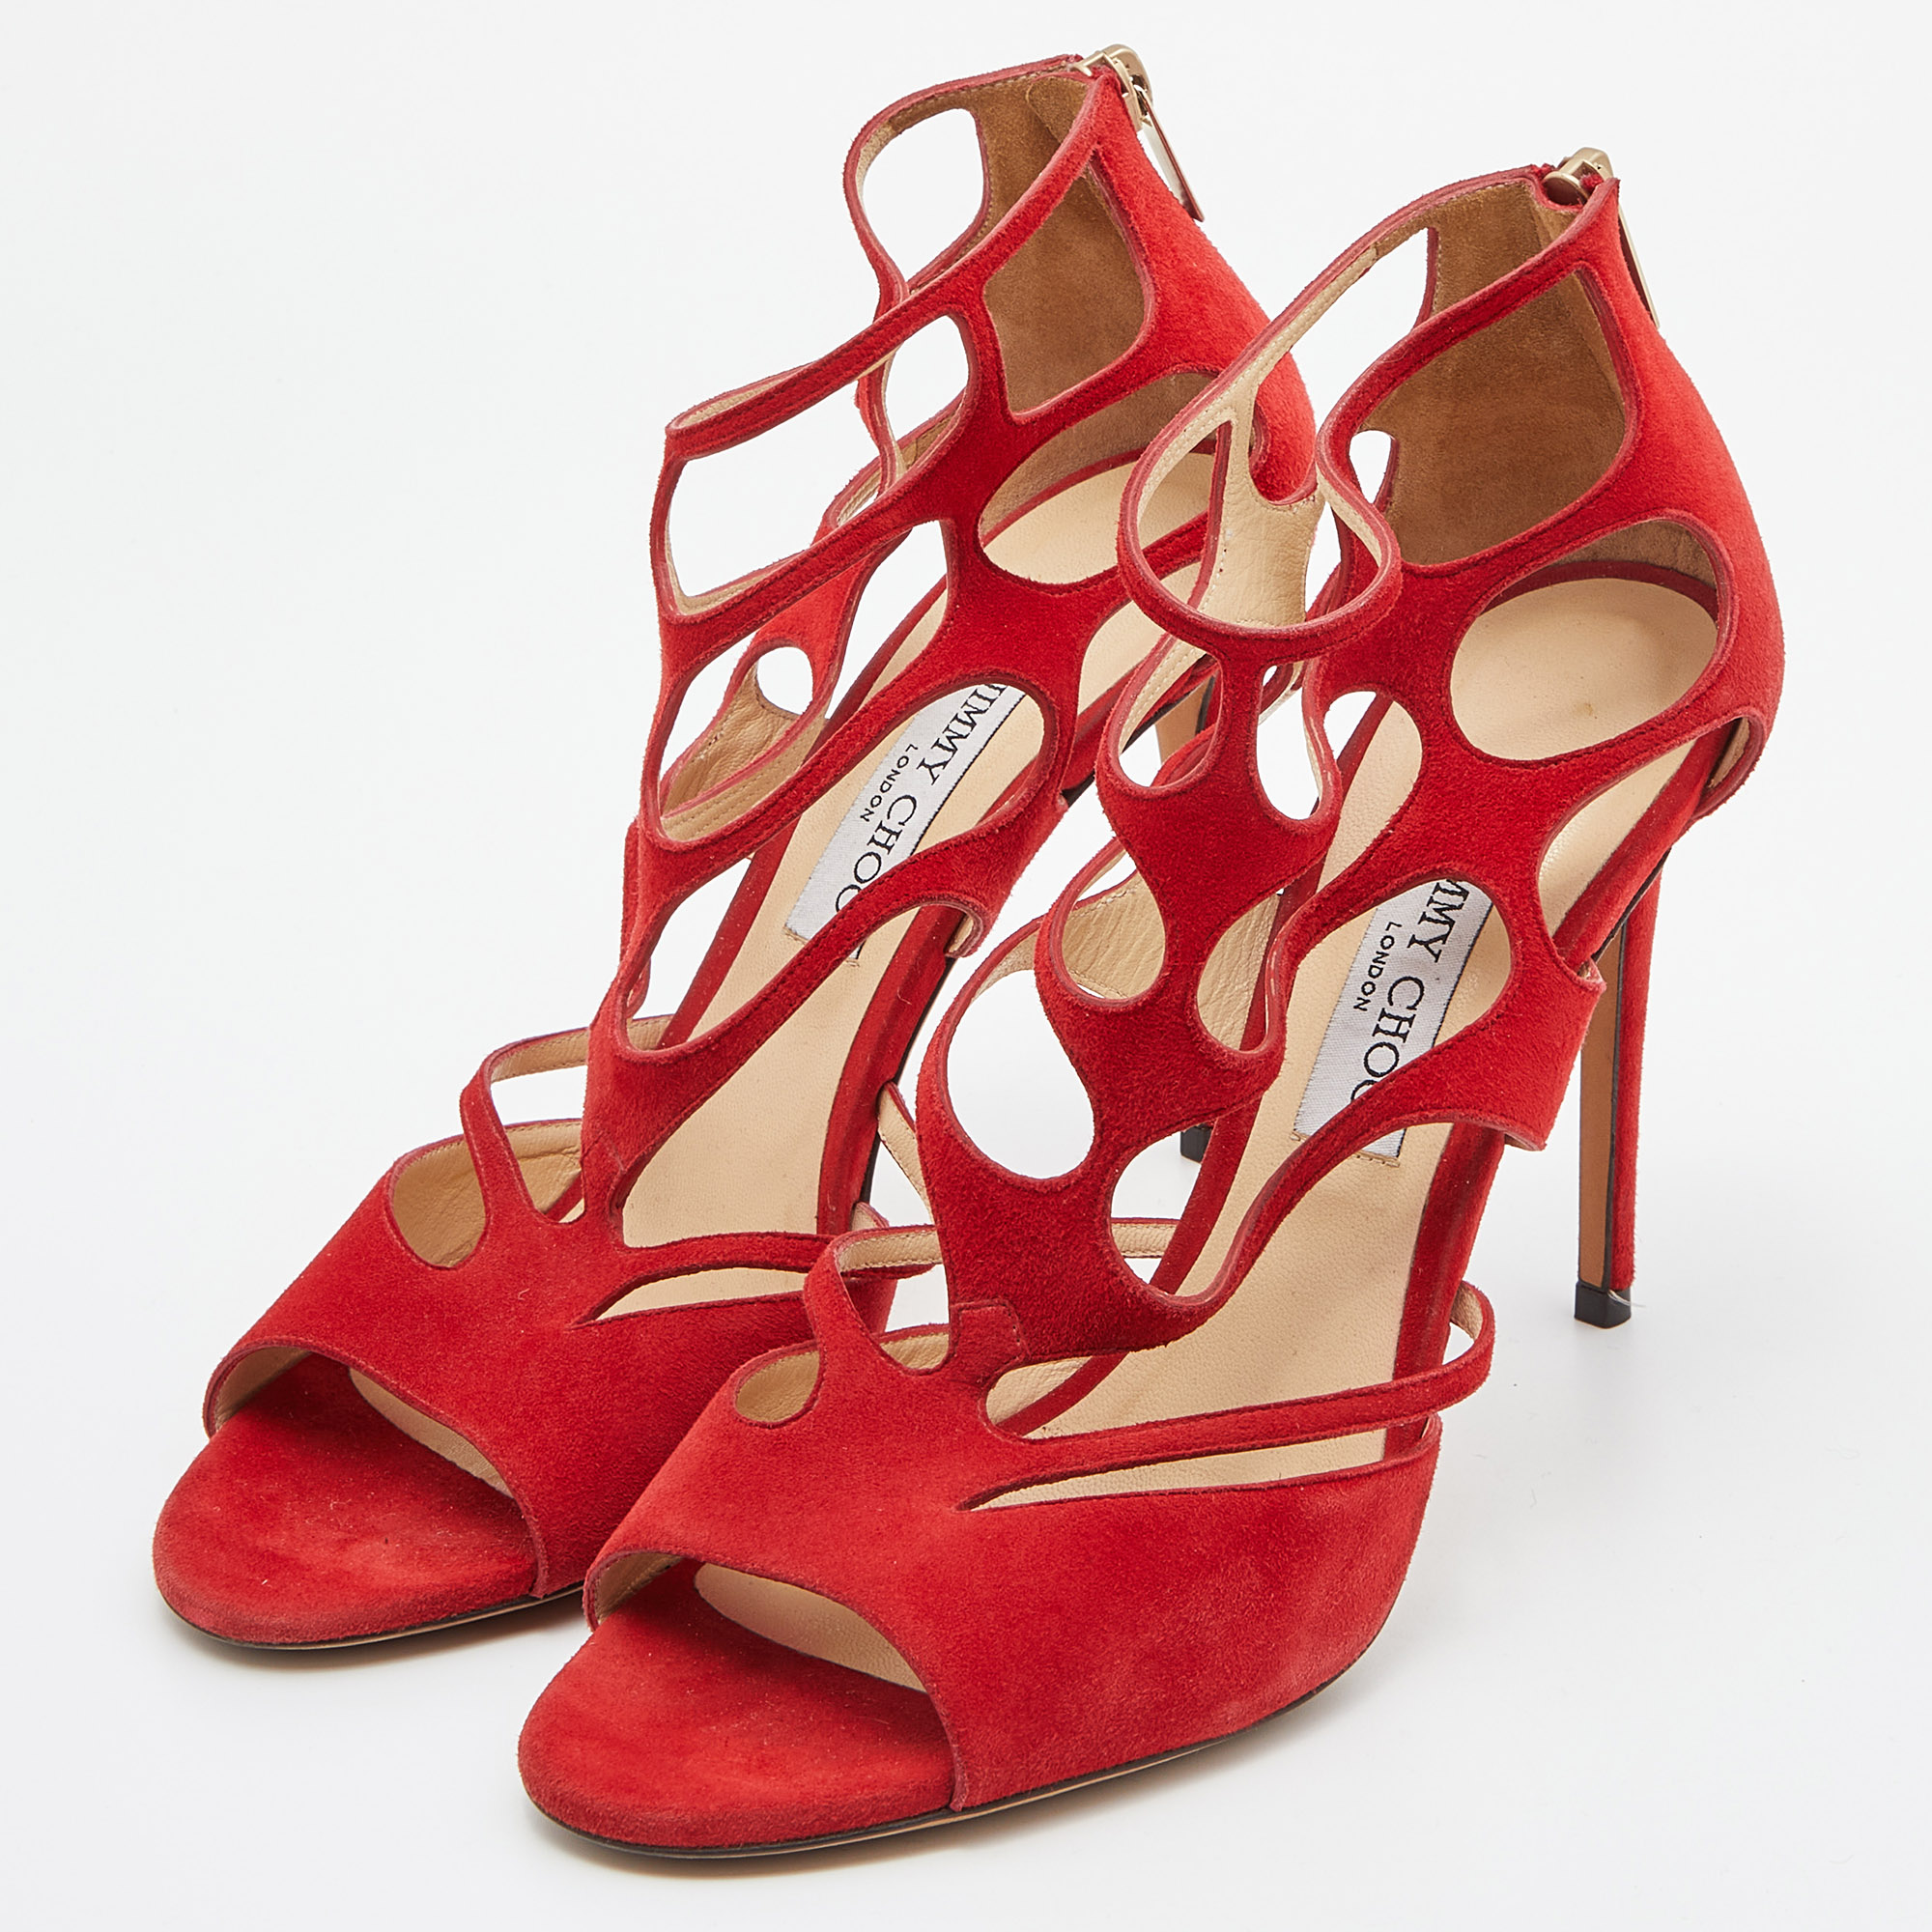 

Jimmy Choo Red Suede Ren Cut Out Peep Toe Sandals Size